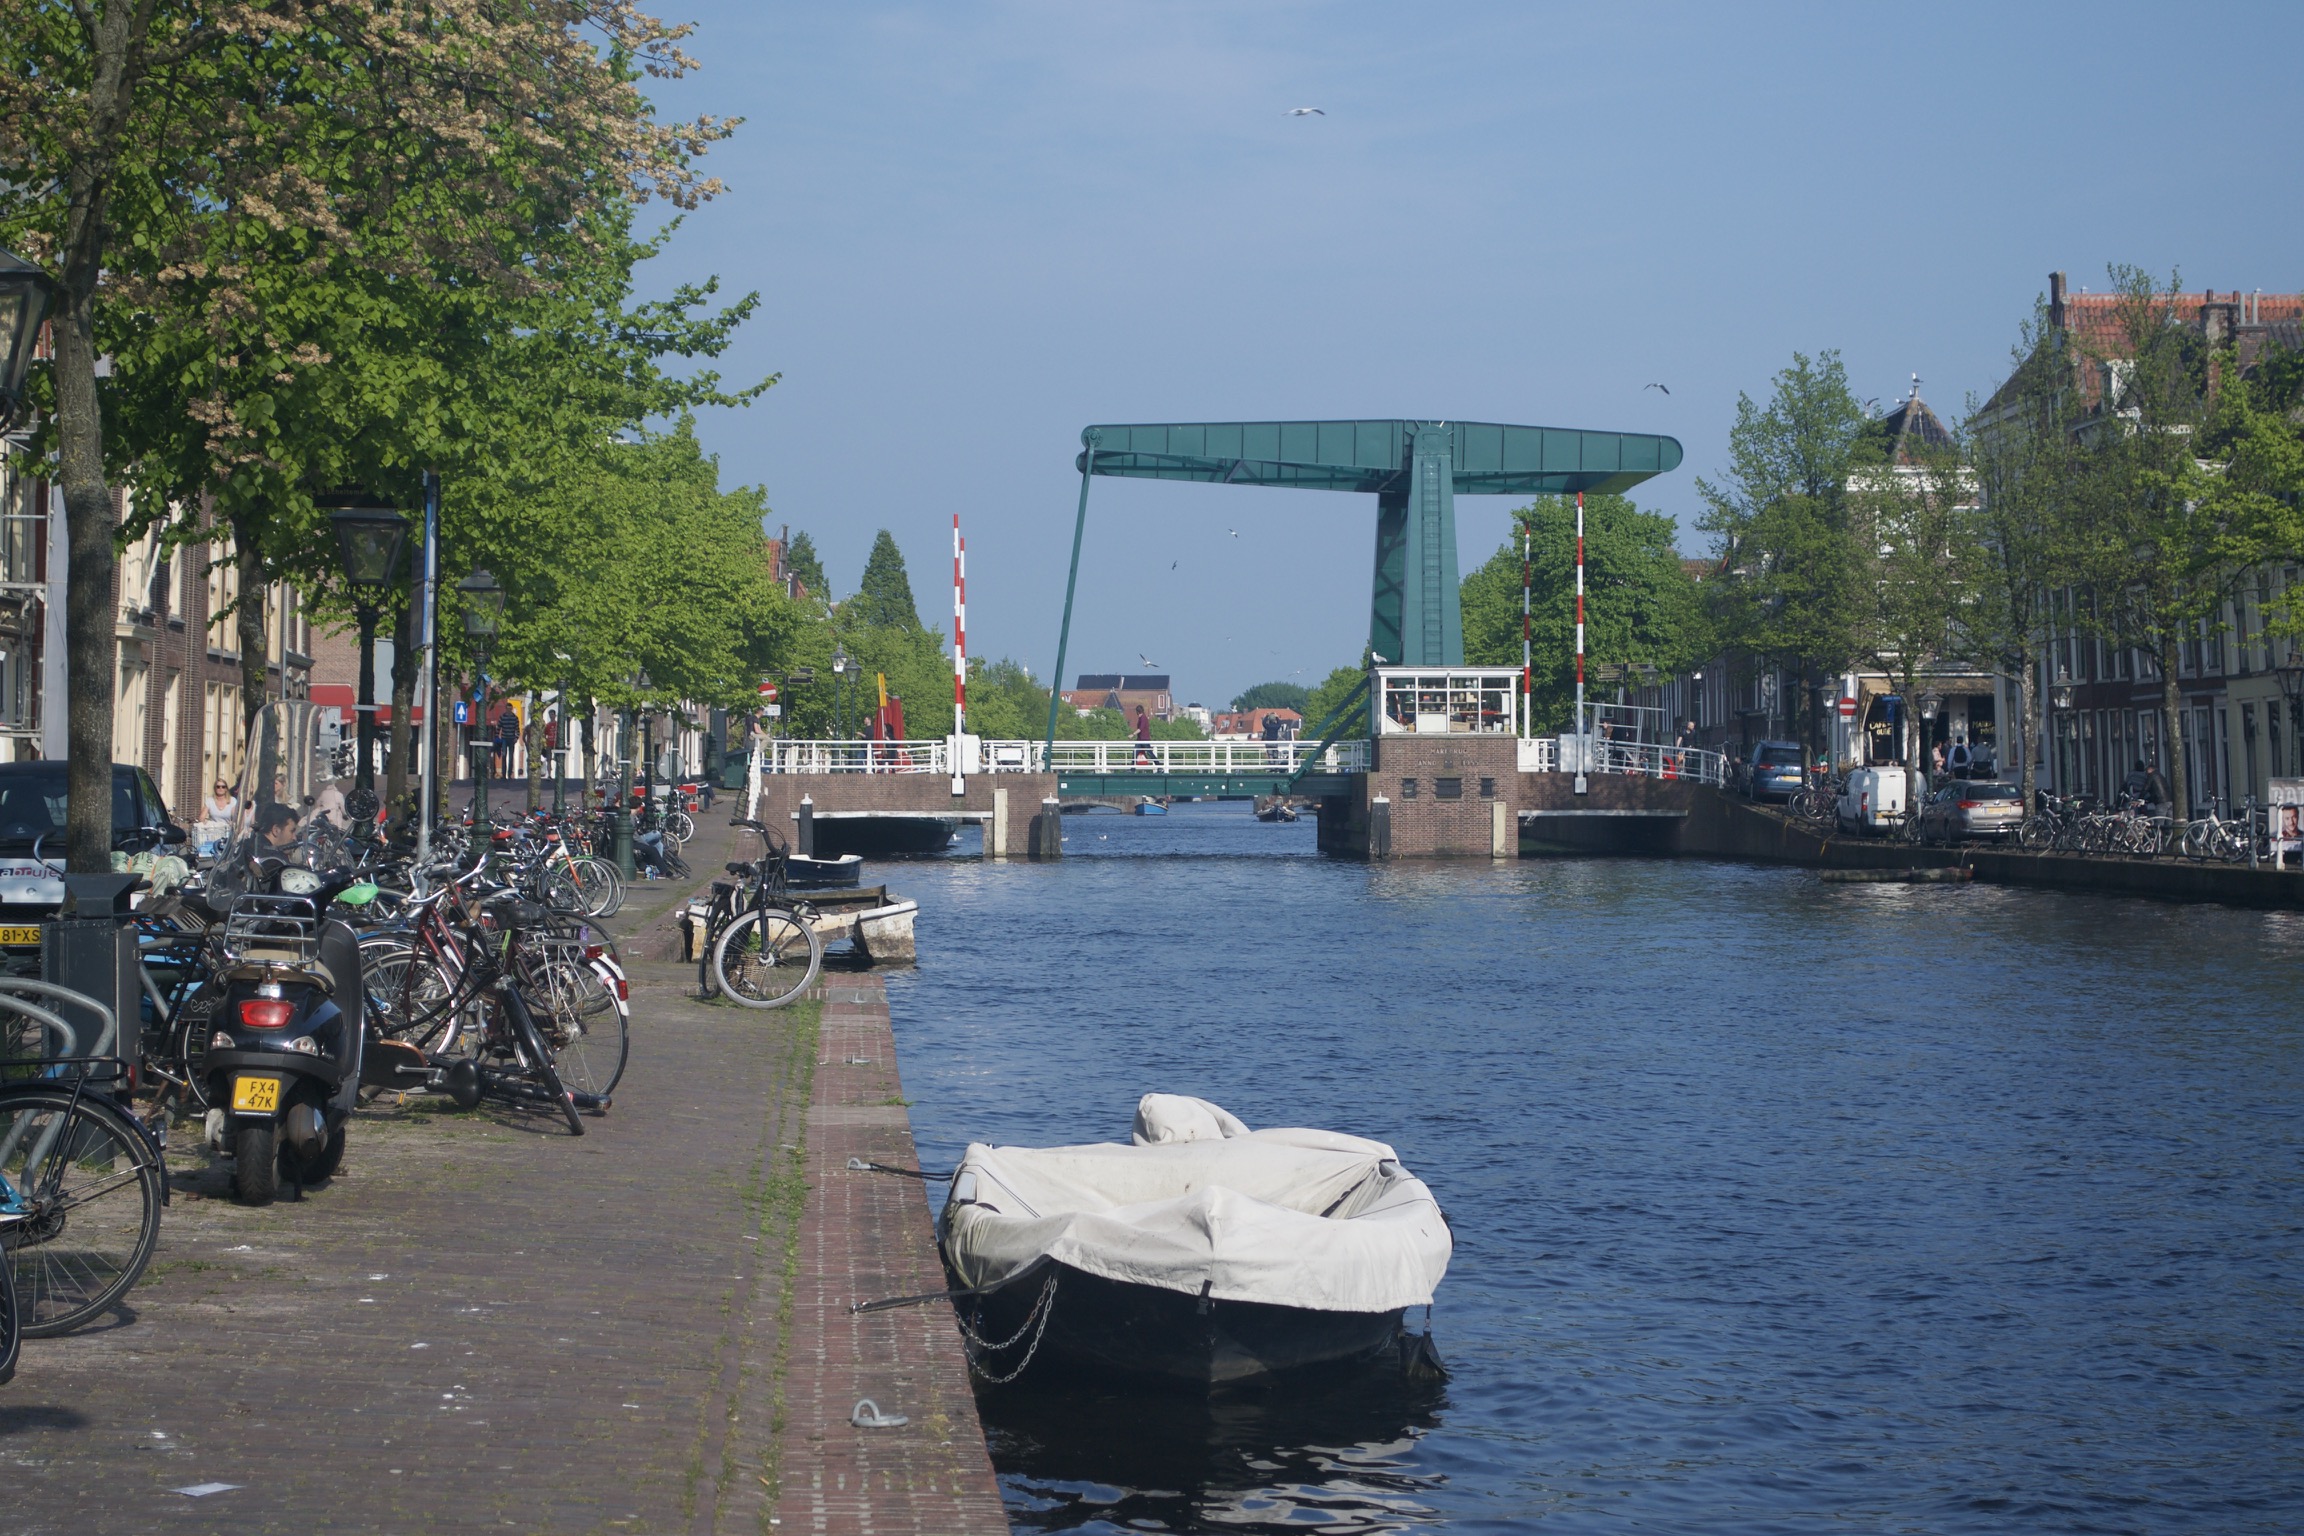 A boat tied up on the side of a canal, with a cantilevered drawbridge in the background.